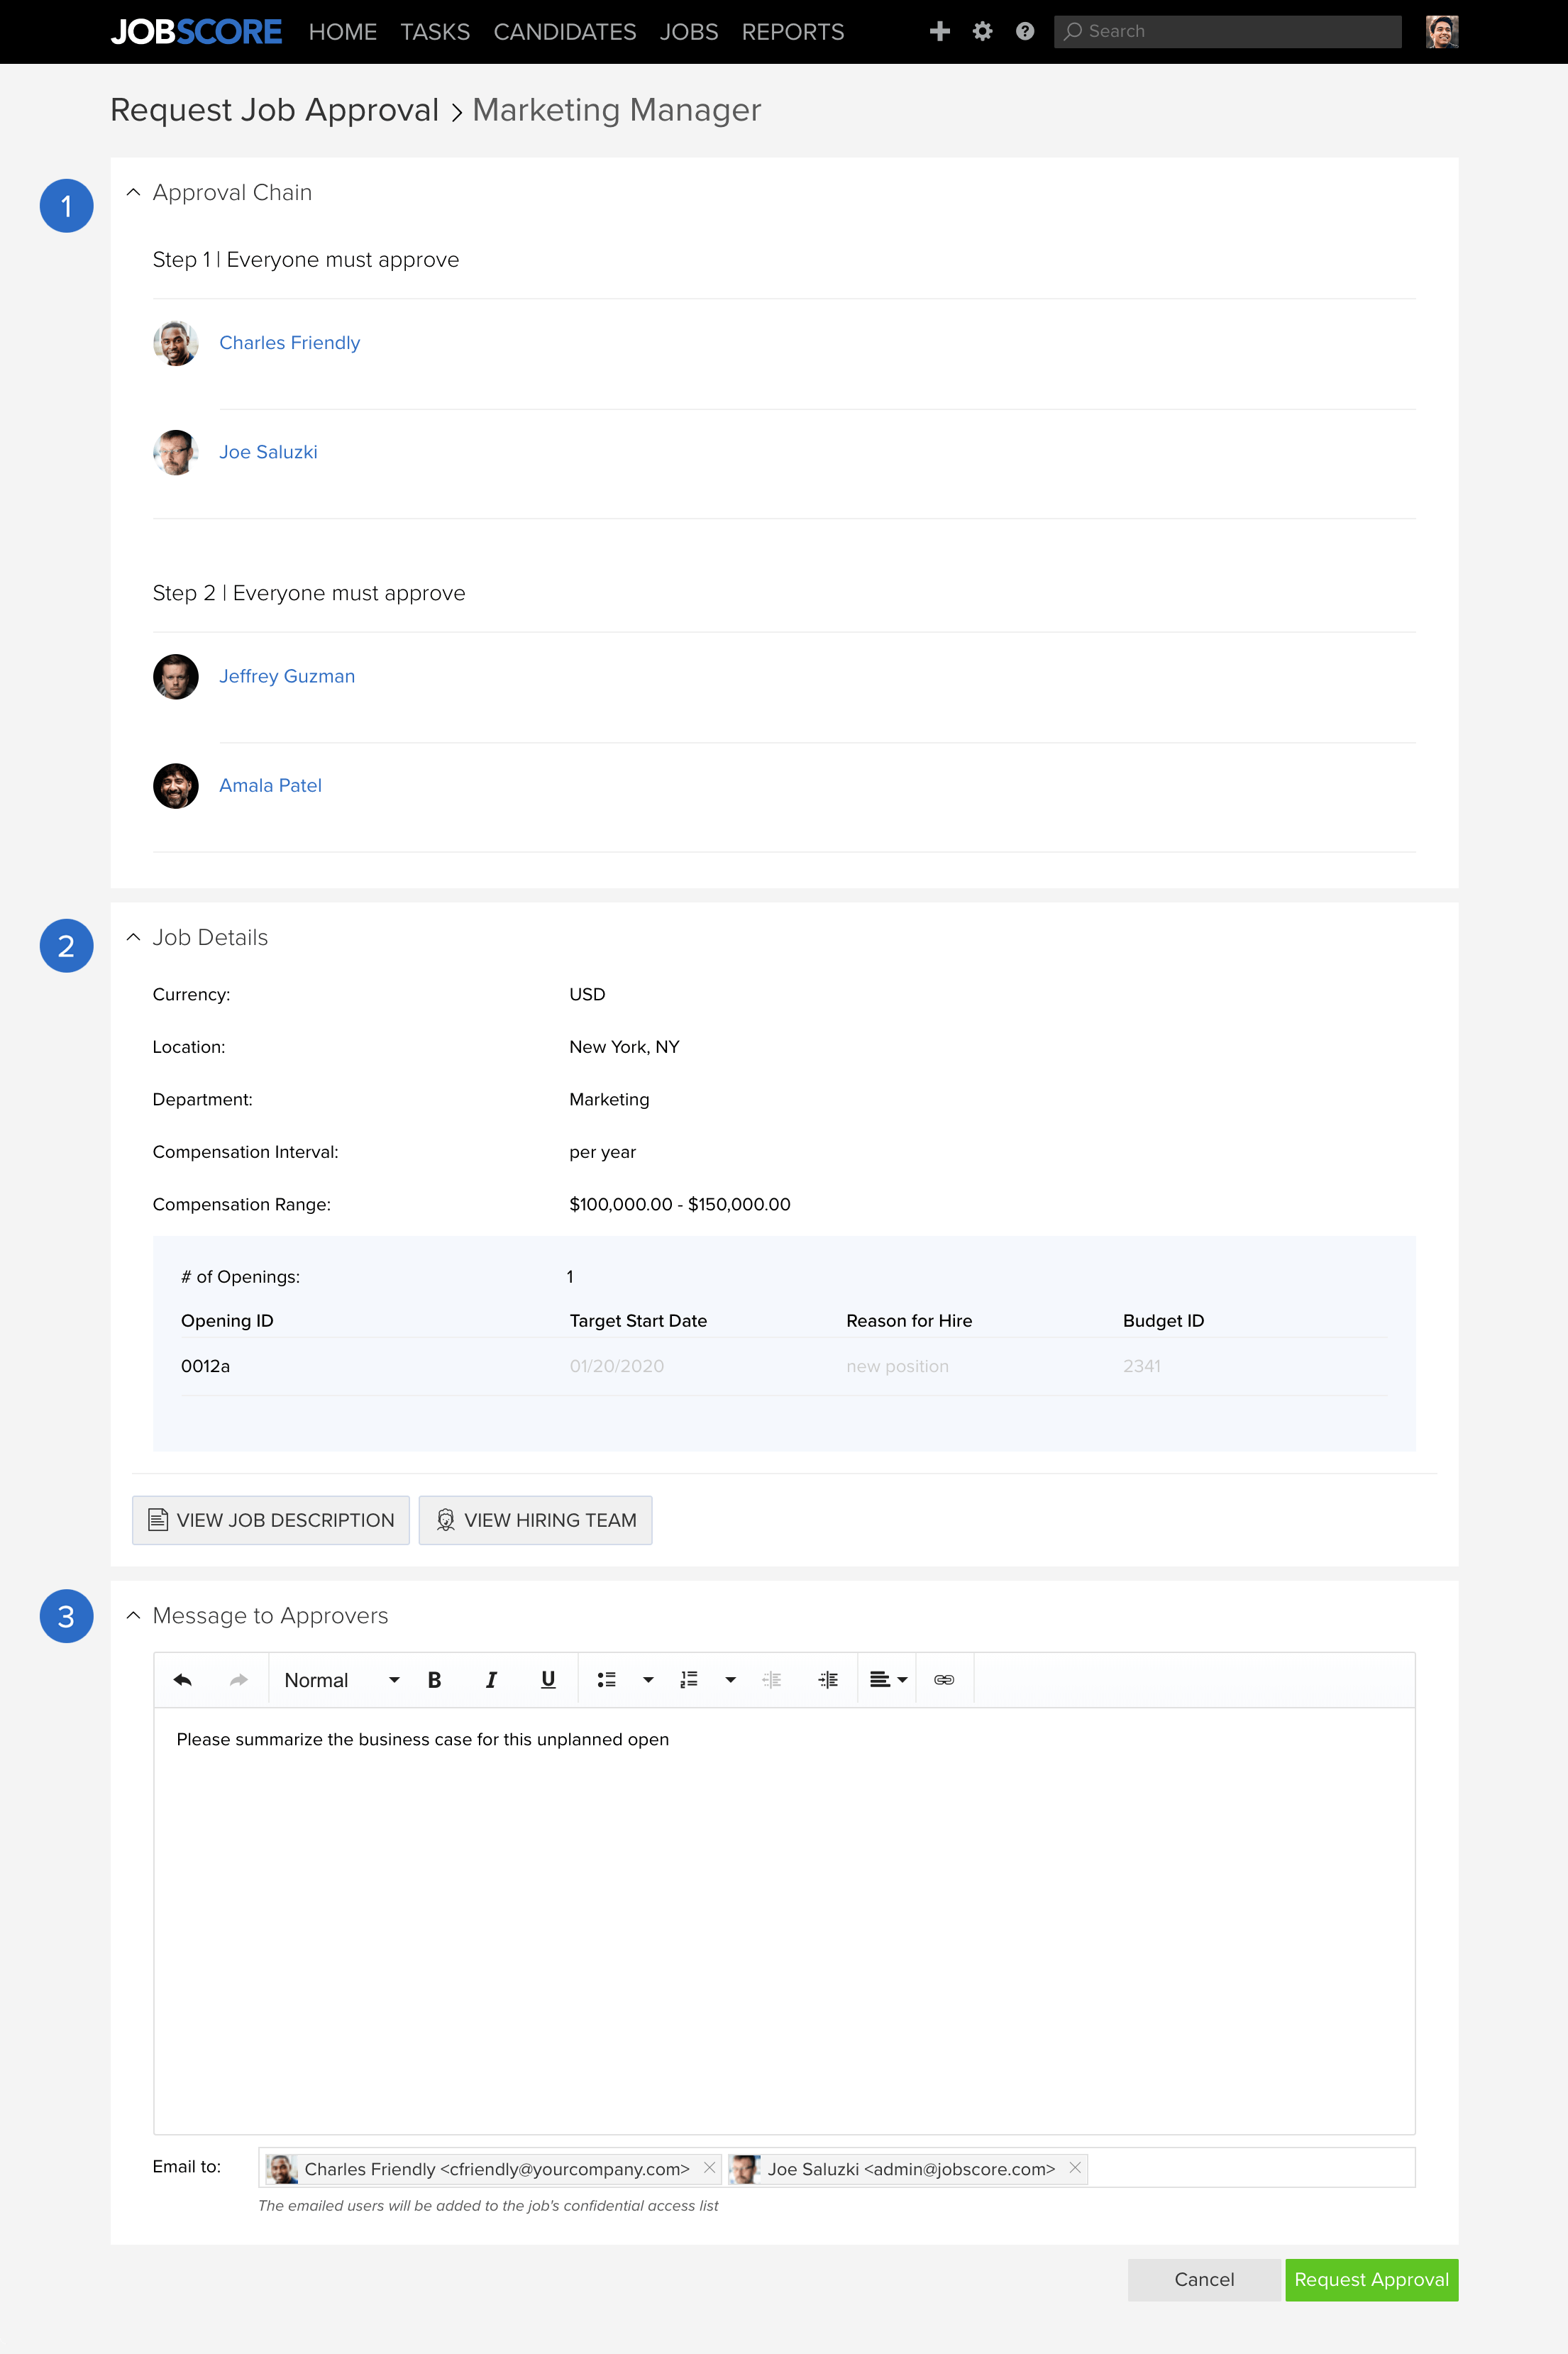 Request Job Approval page